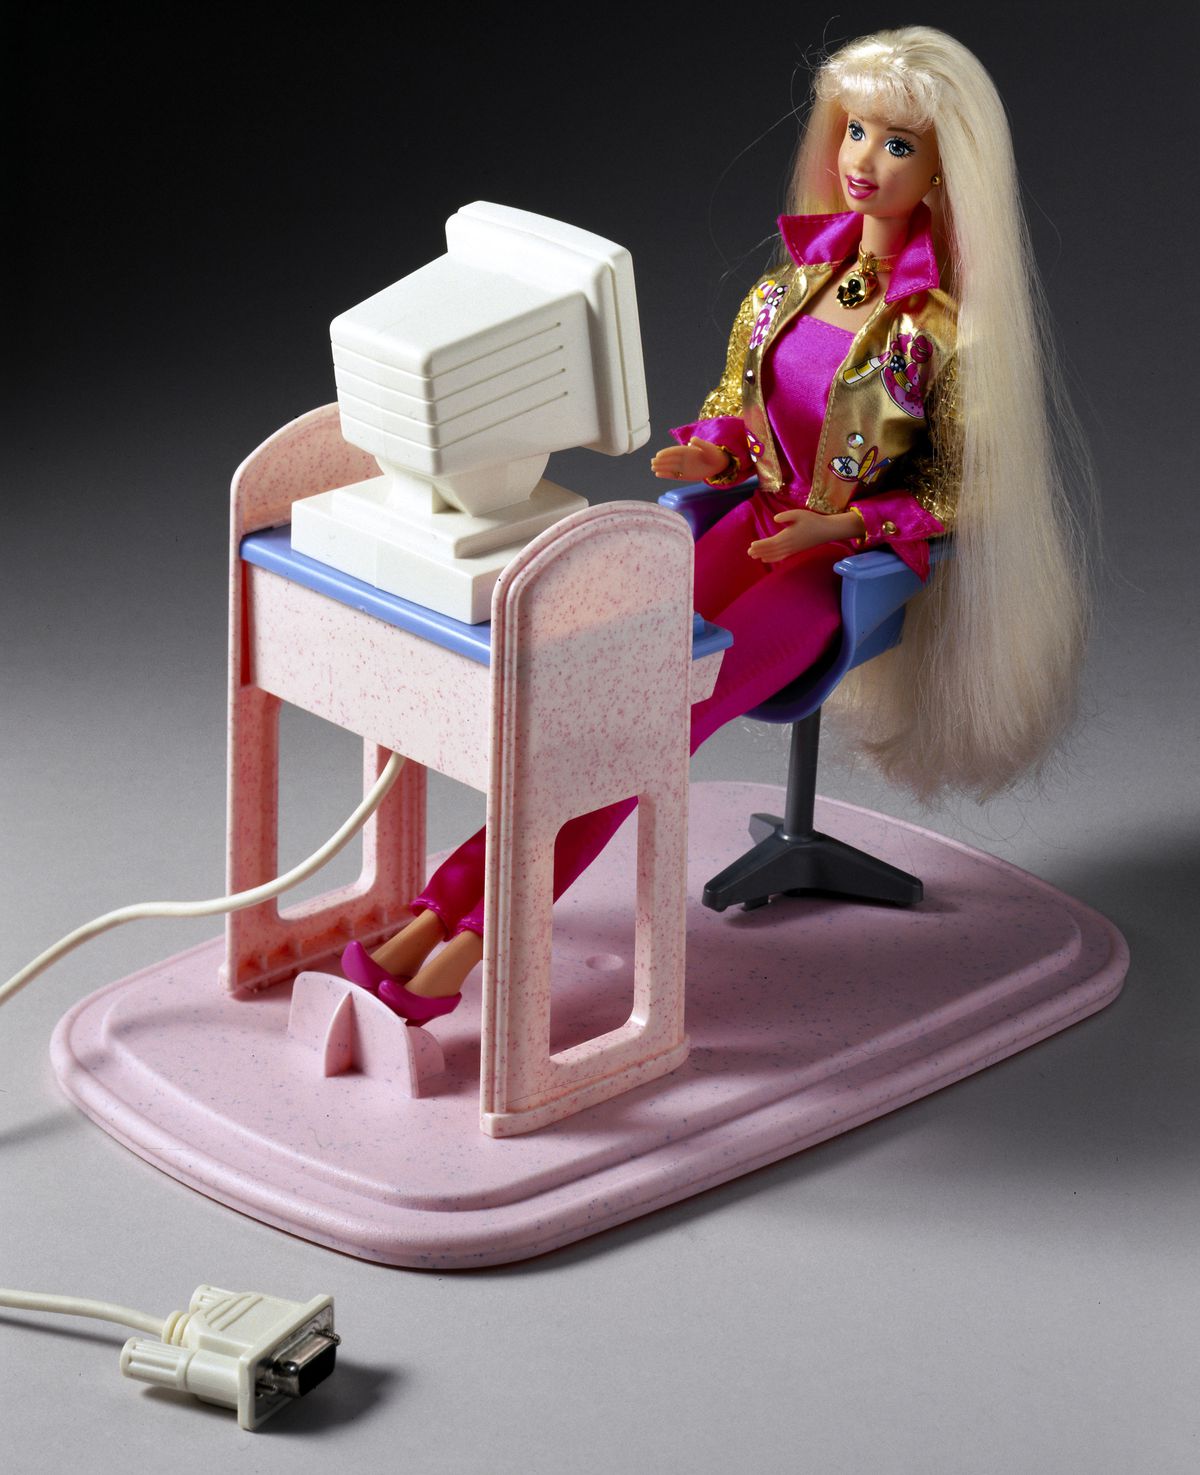 Talk With Me! Barbie doll, USA, 1997, using a computer. There’s a cord sticking out from her machine.